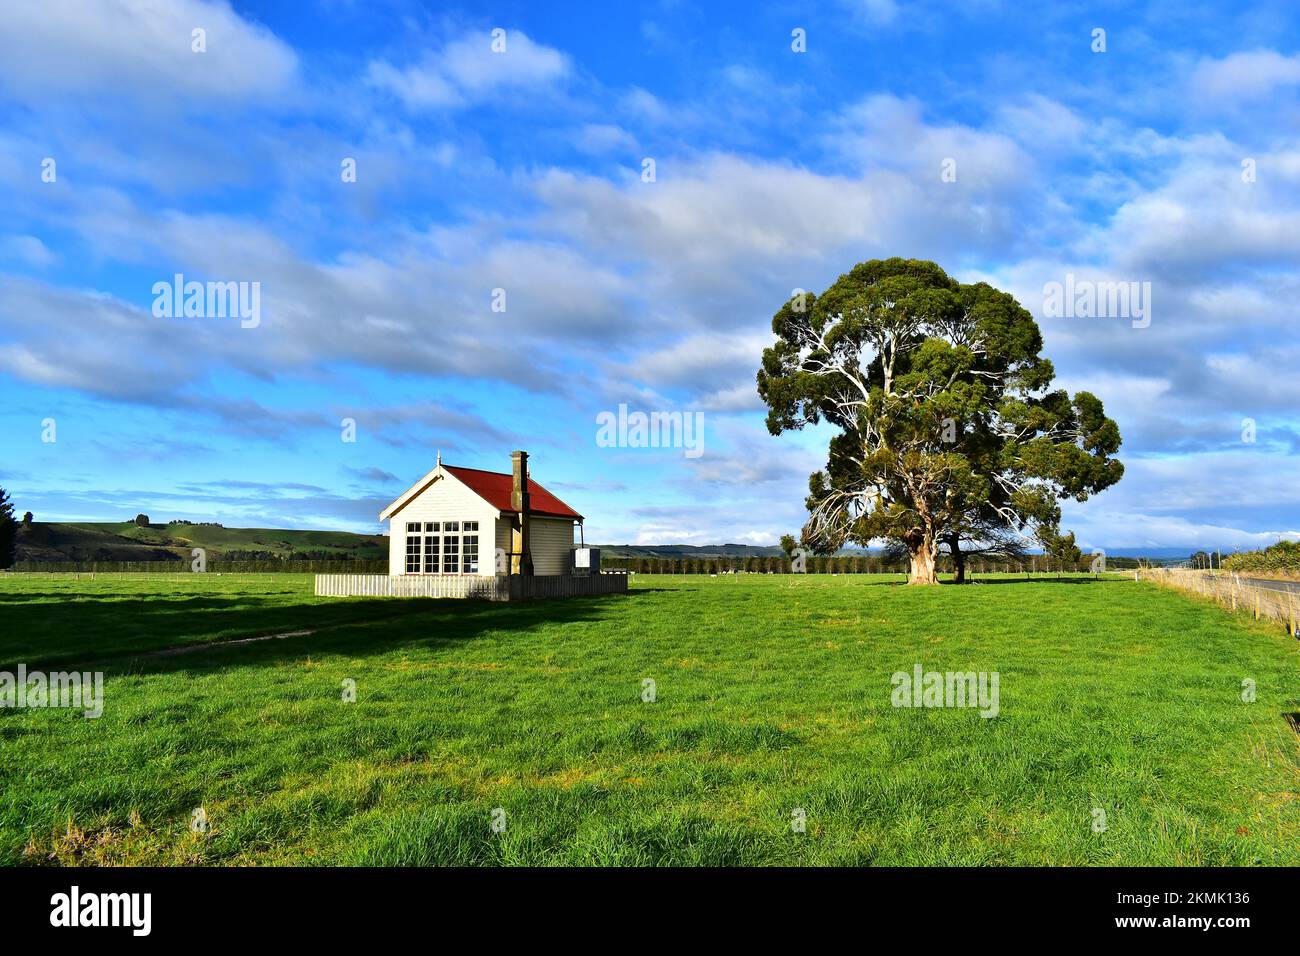 historic schoolhouse amongst field and large tree. Stock Photo